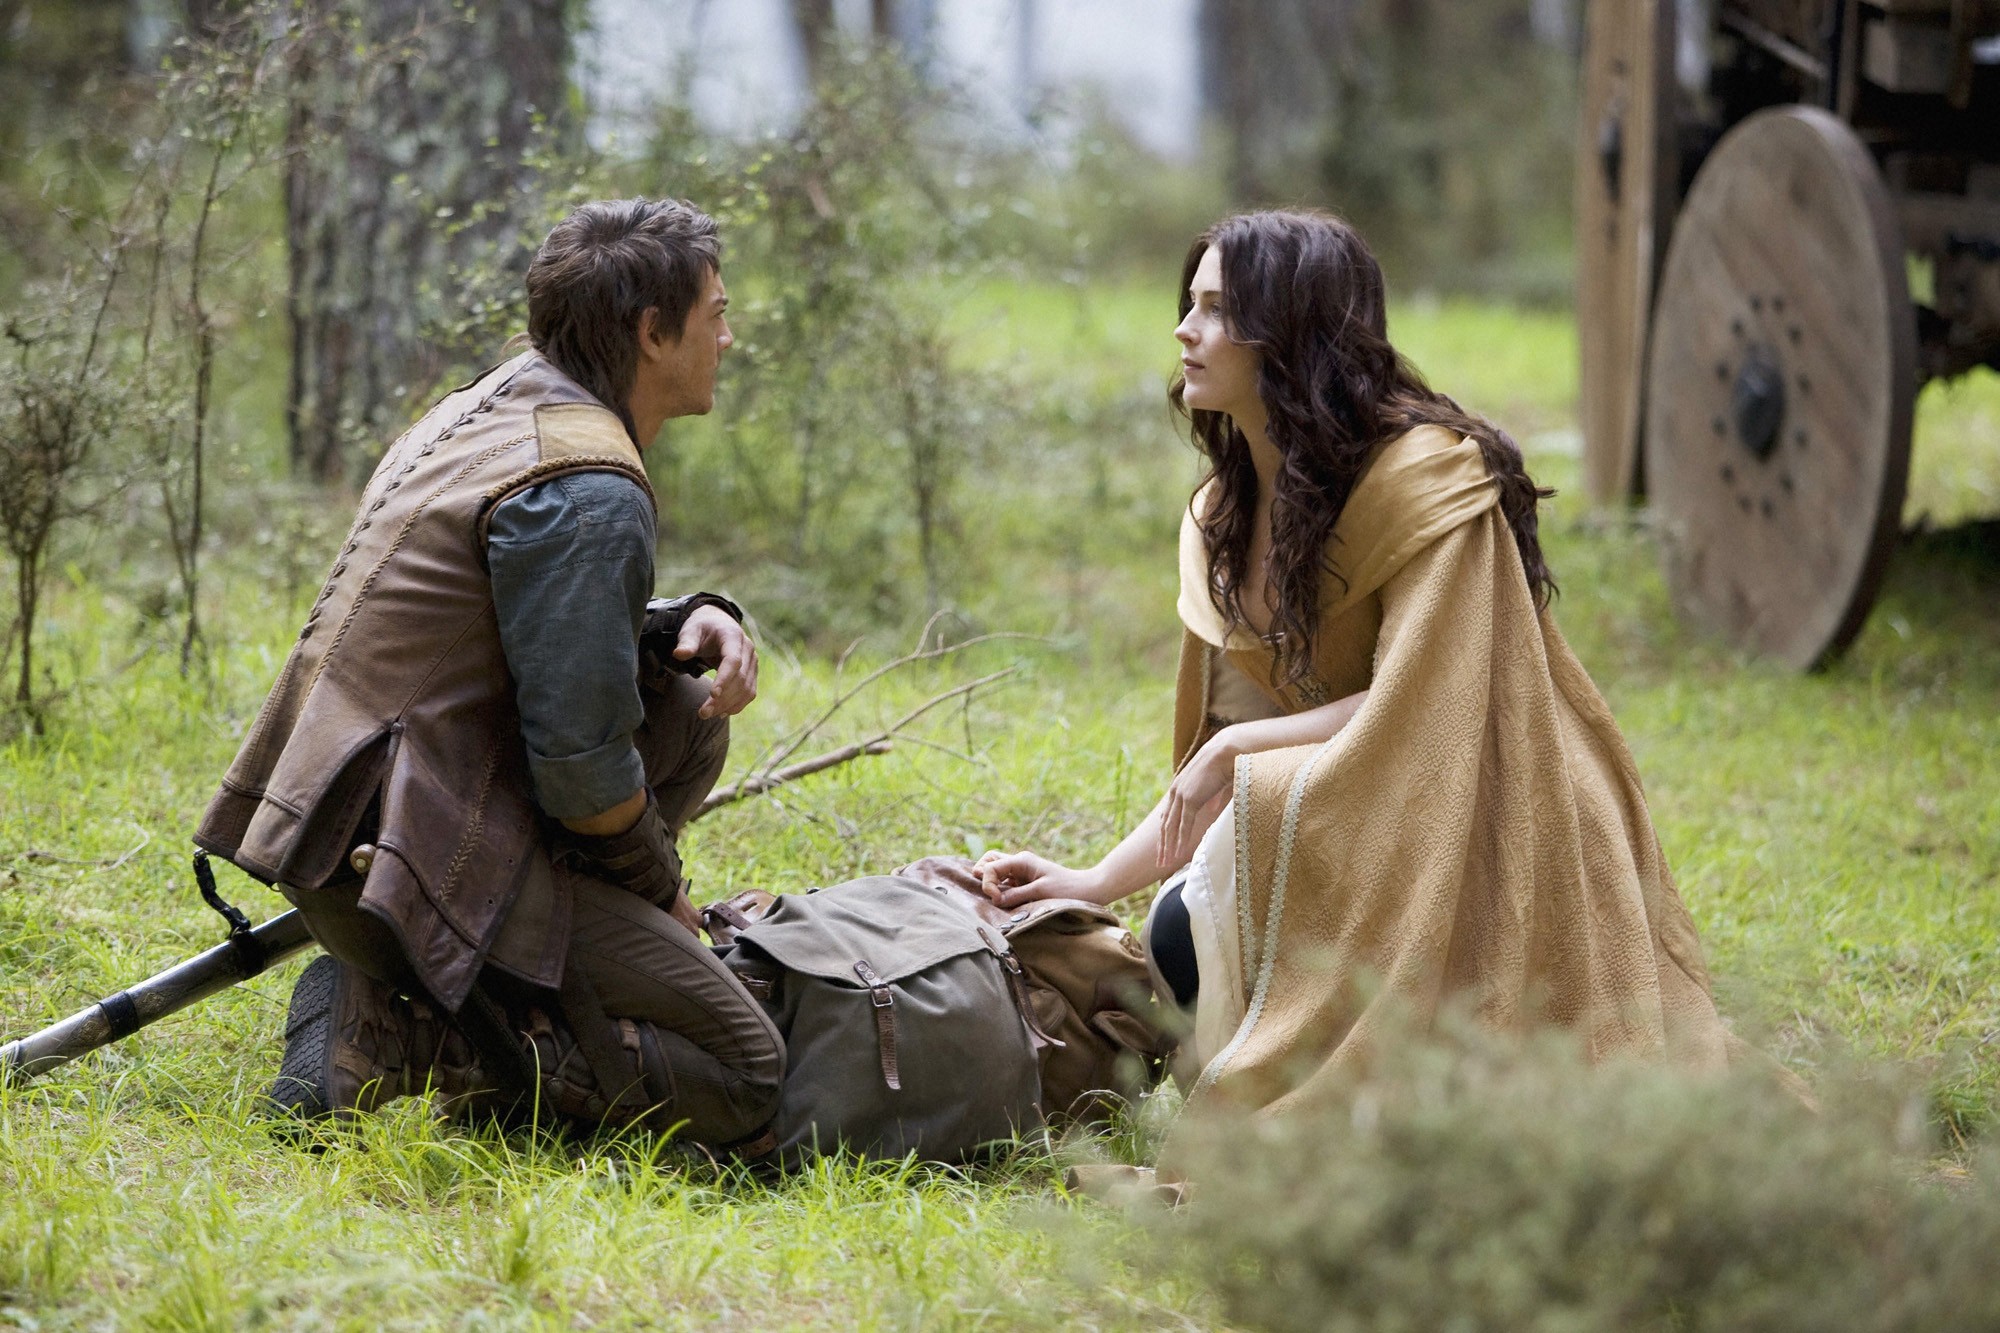 where can i watch legend of the seeker online free